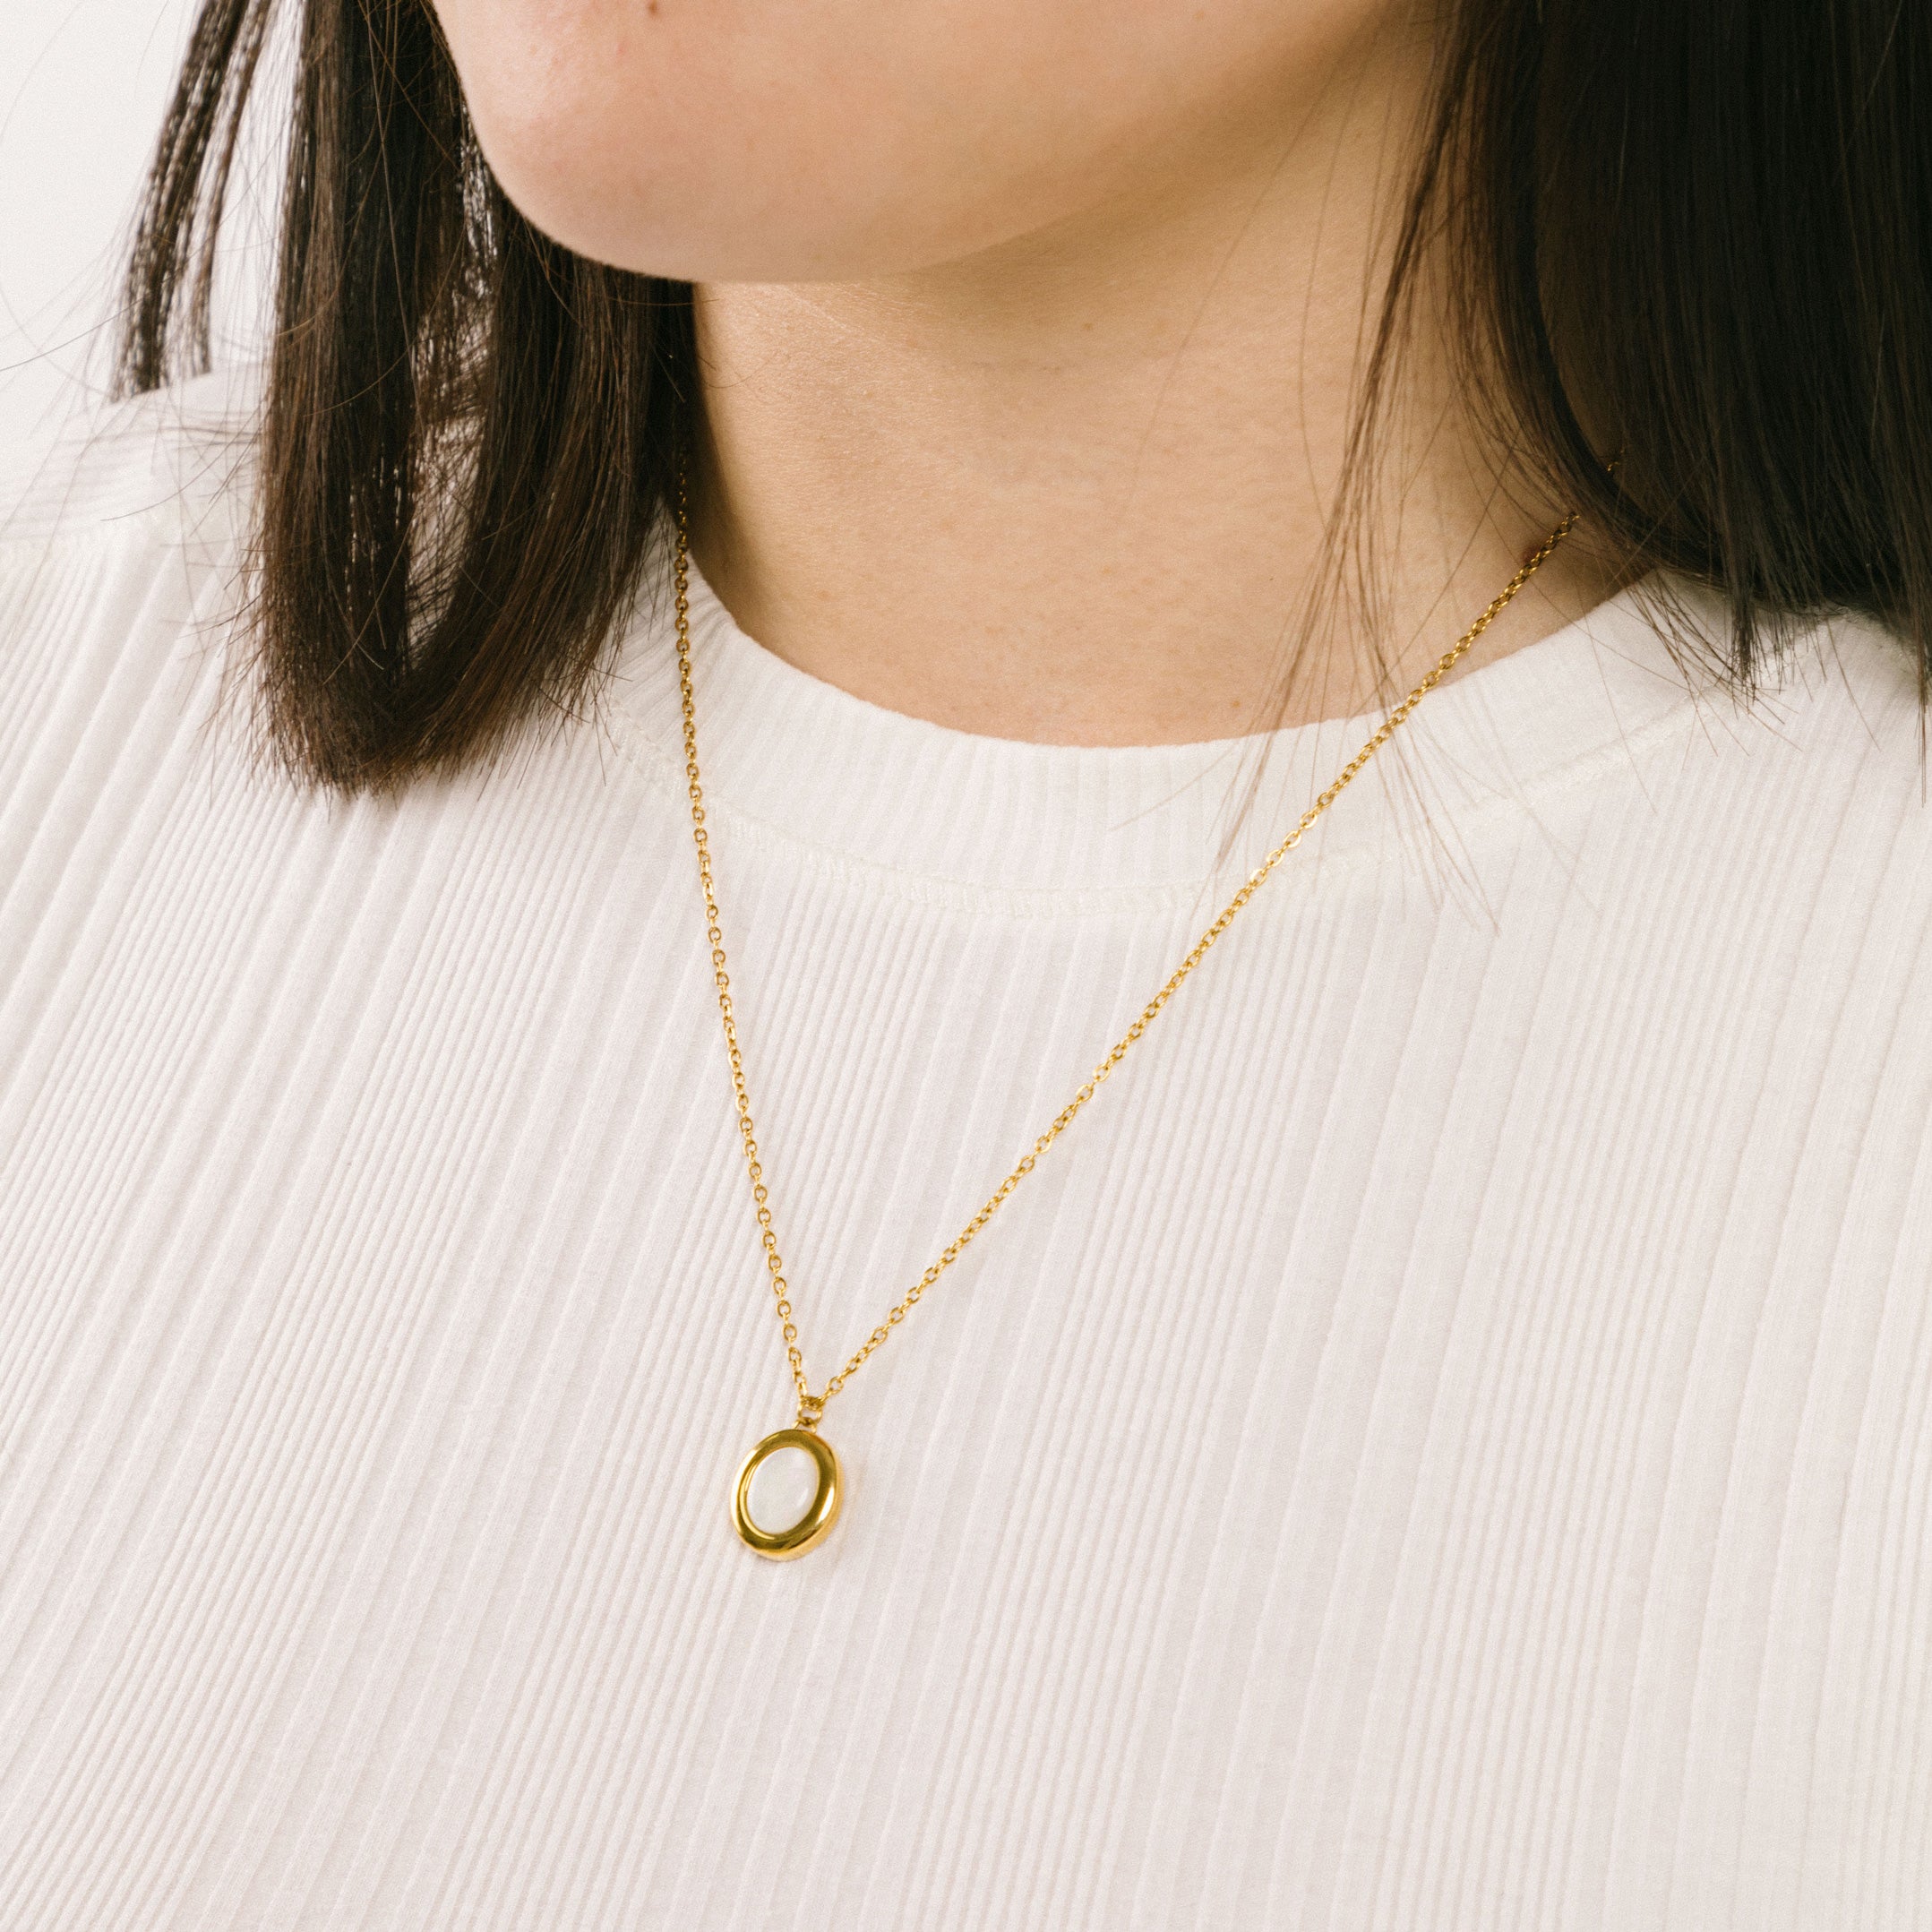 A model wearing the Mother of Pearl Pendant Necklace is crafted from 18K Gold Plated over Stainless Steel and is both non-tarnish and waterproof - perfect for everyday wear. For an added touch, pair the necklace with its sister Celestial Ring for the complete, stunning look.